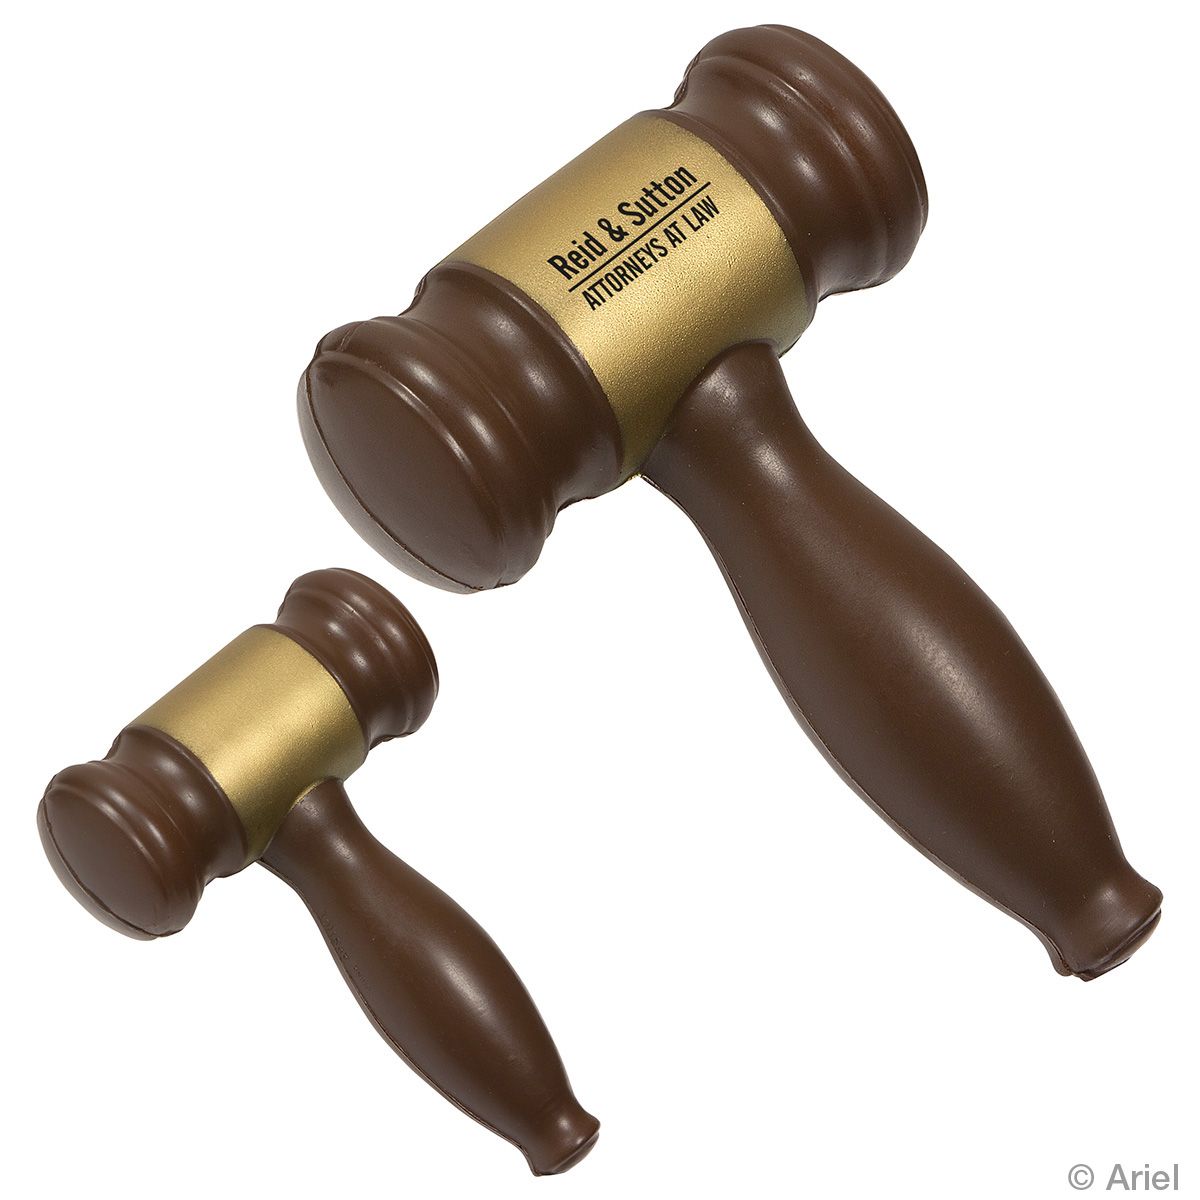 Gavel Stress Reliever